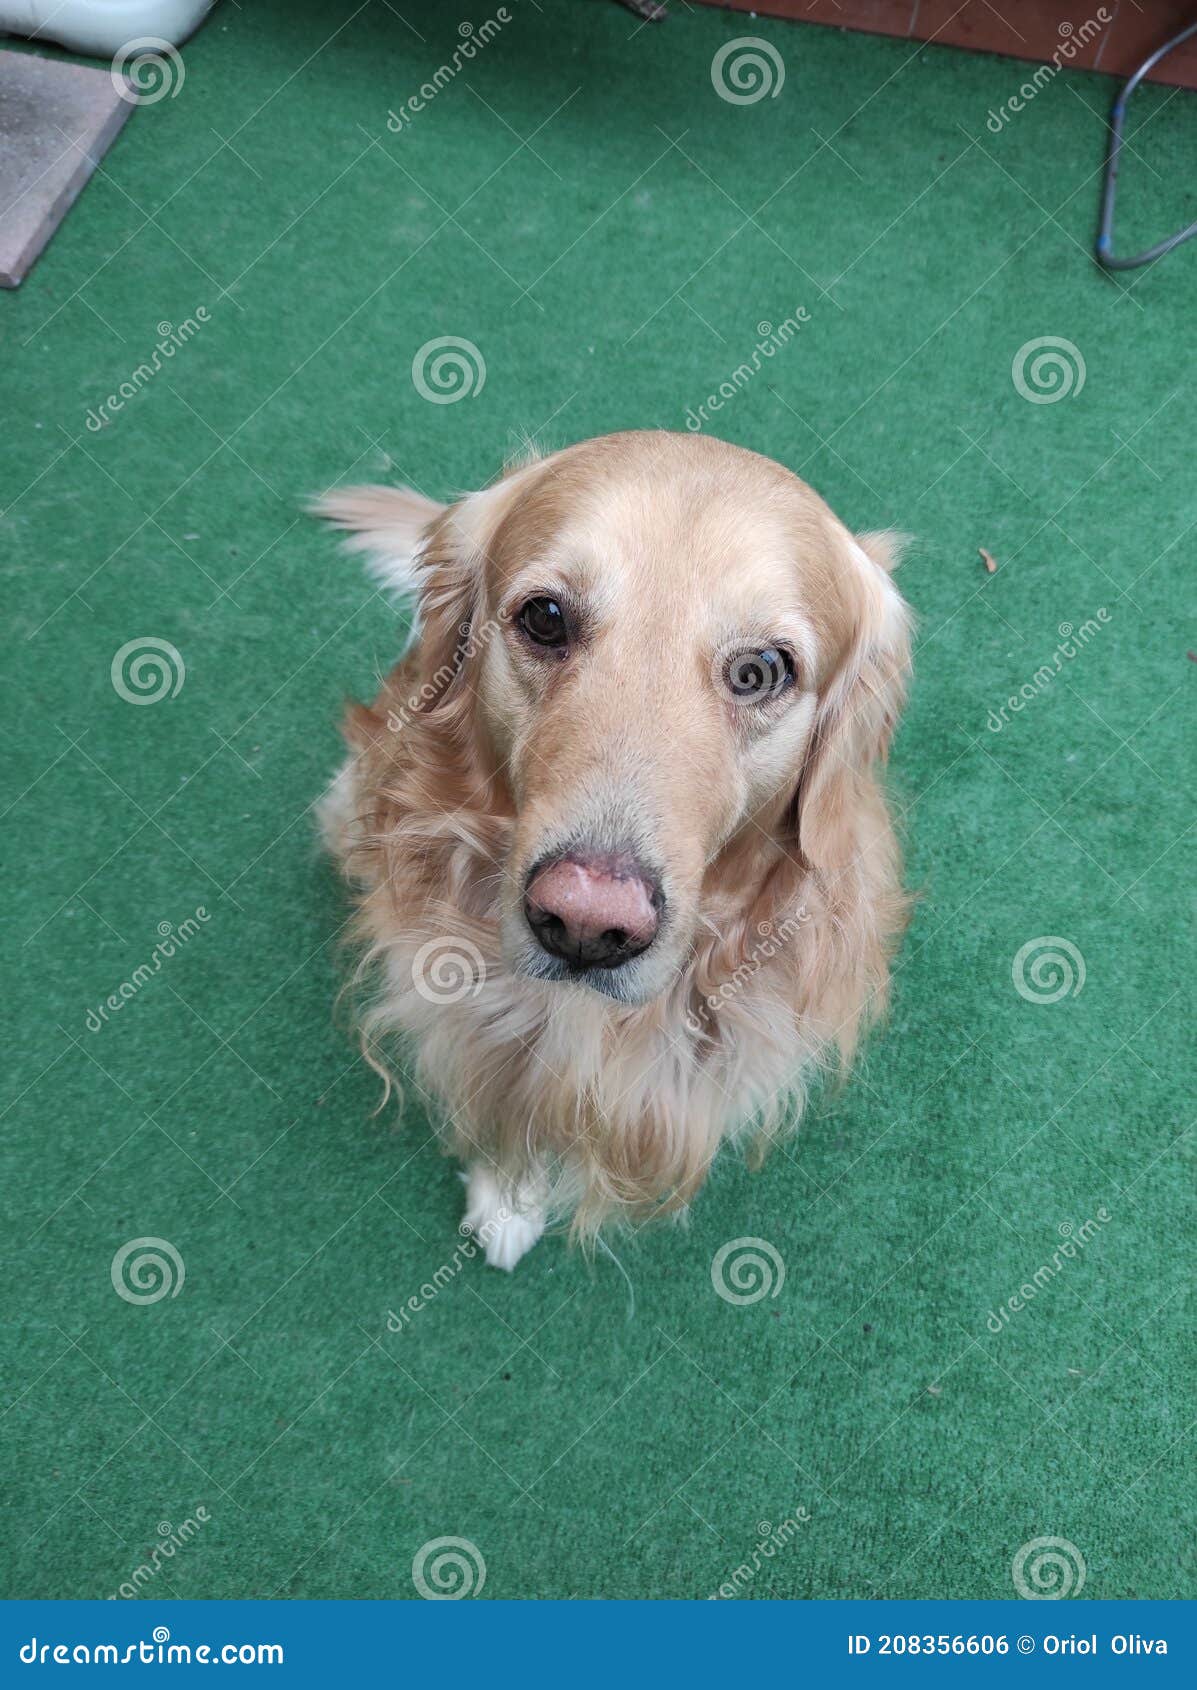 stretched out golden retriever dog resting on artificial grass floor